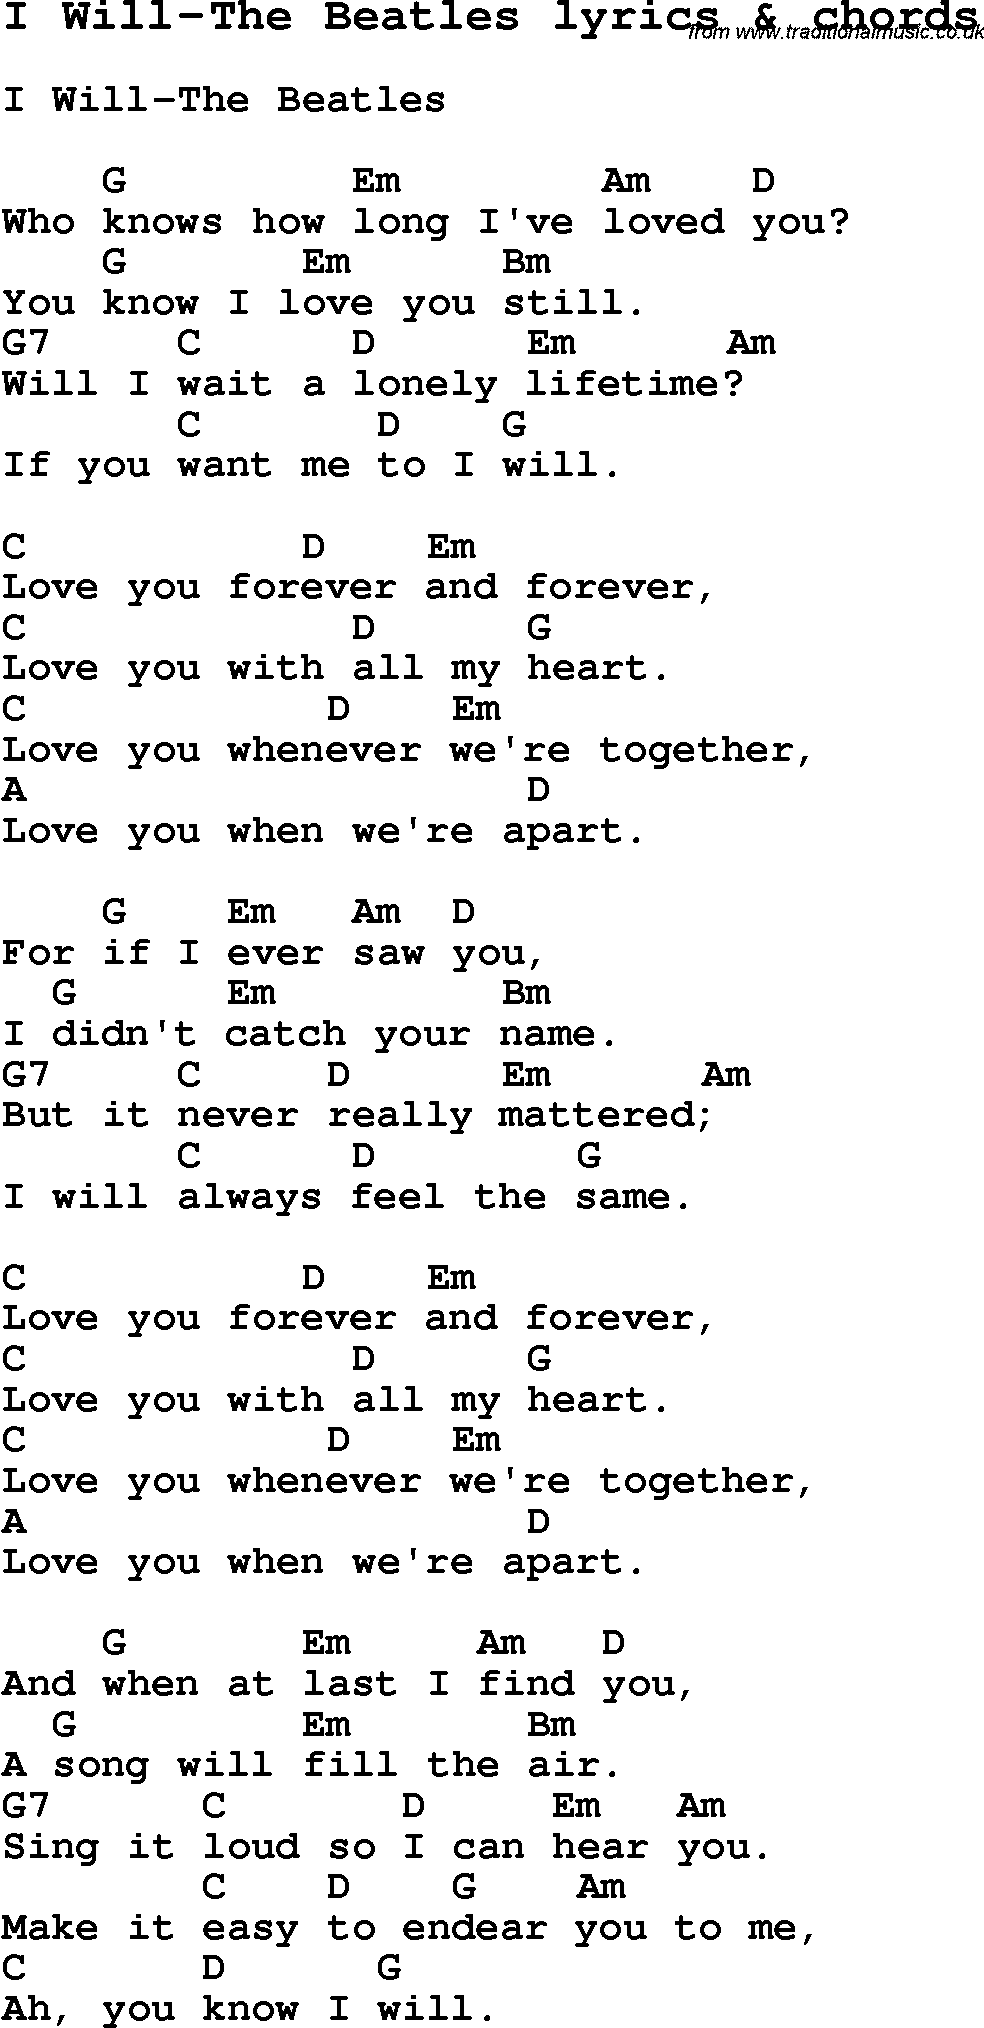 Love Song Lyrics for: I Will-The Beatles with chords for Ukulele, Guitar Banjo etc.